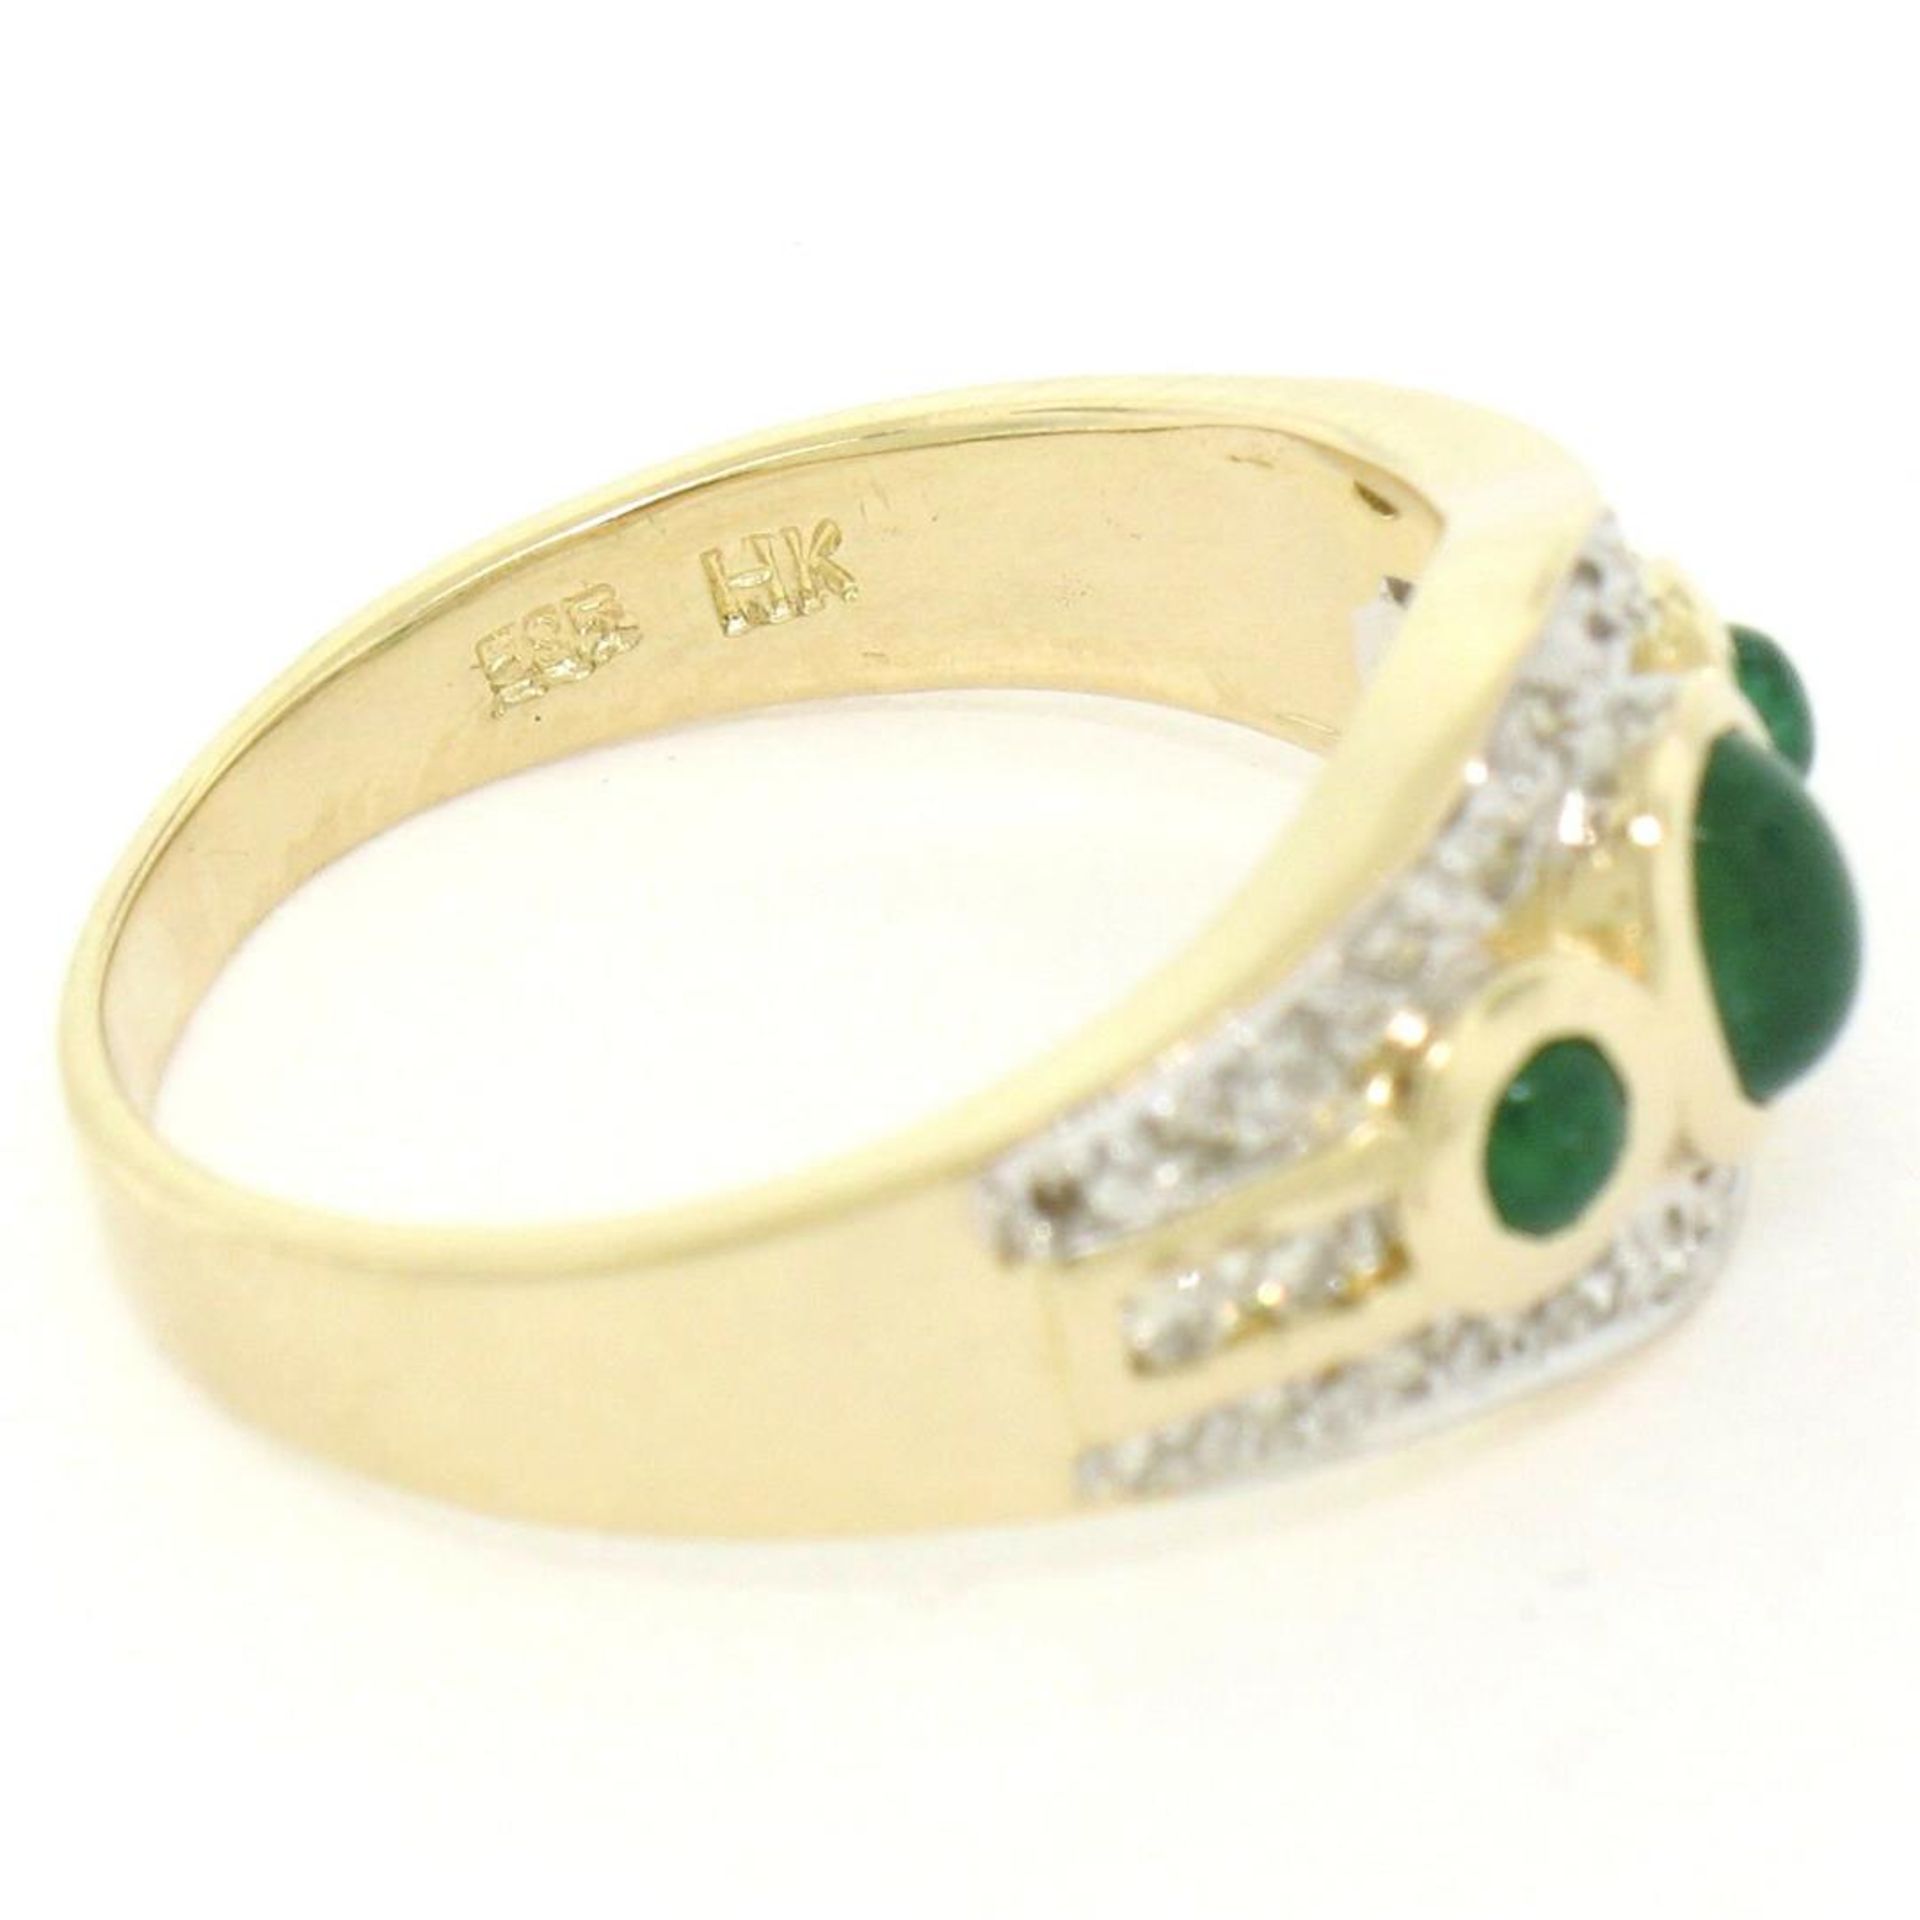 Petite 14K TT Gold 0.68 ctw 3 Cabochon Emerald & Diamond Accented Cocktail Ring - Image 8 of 9